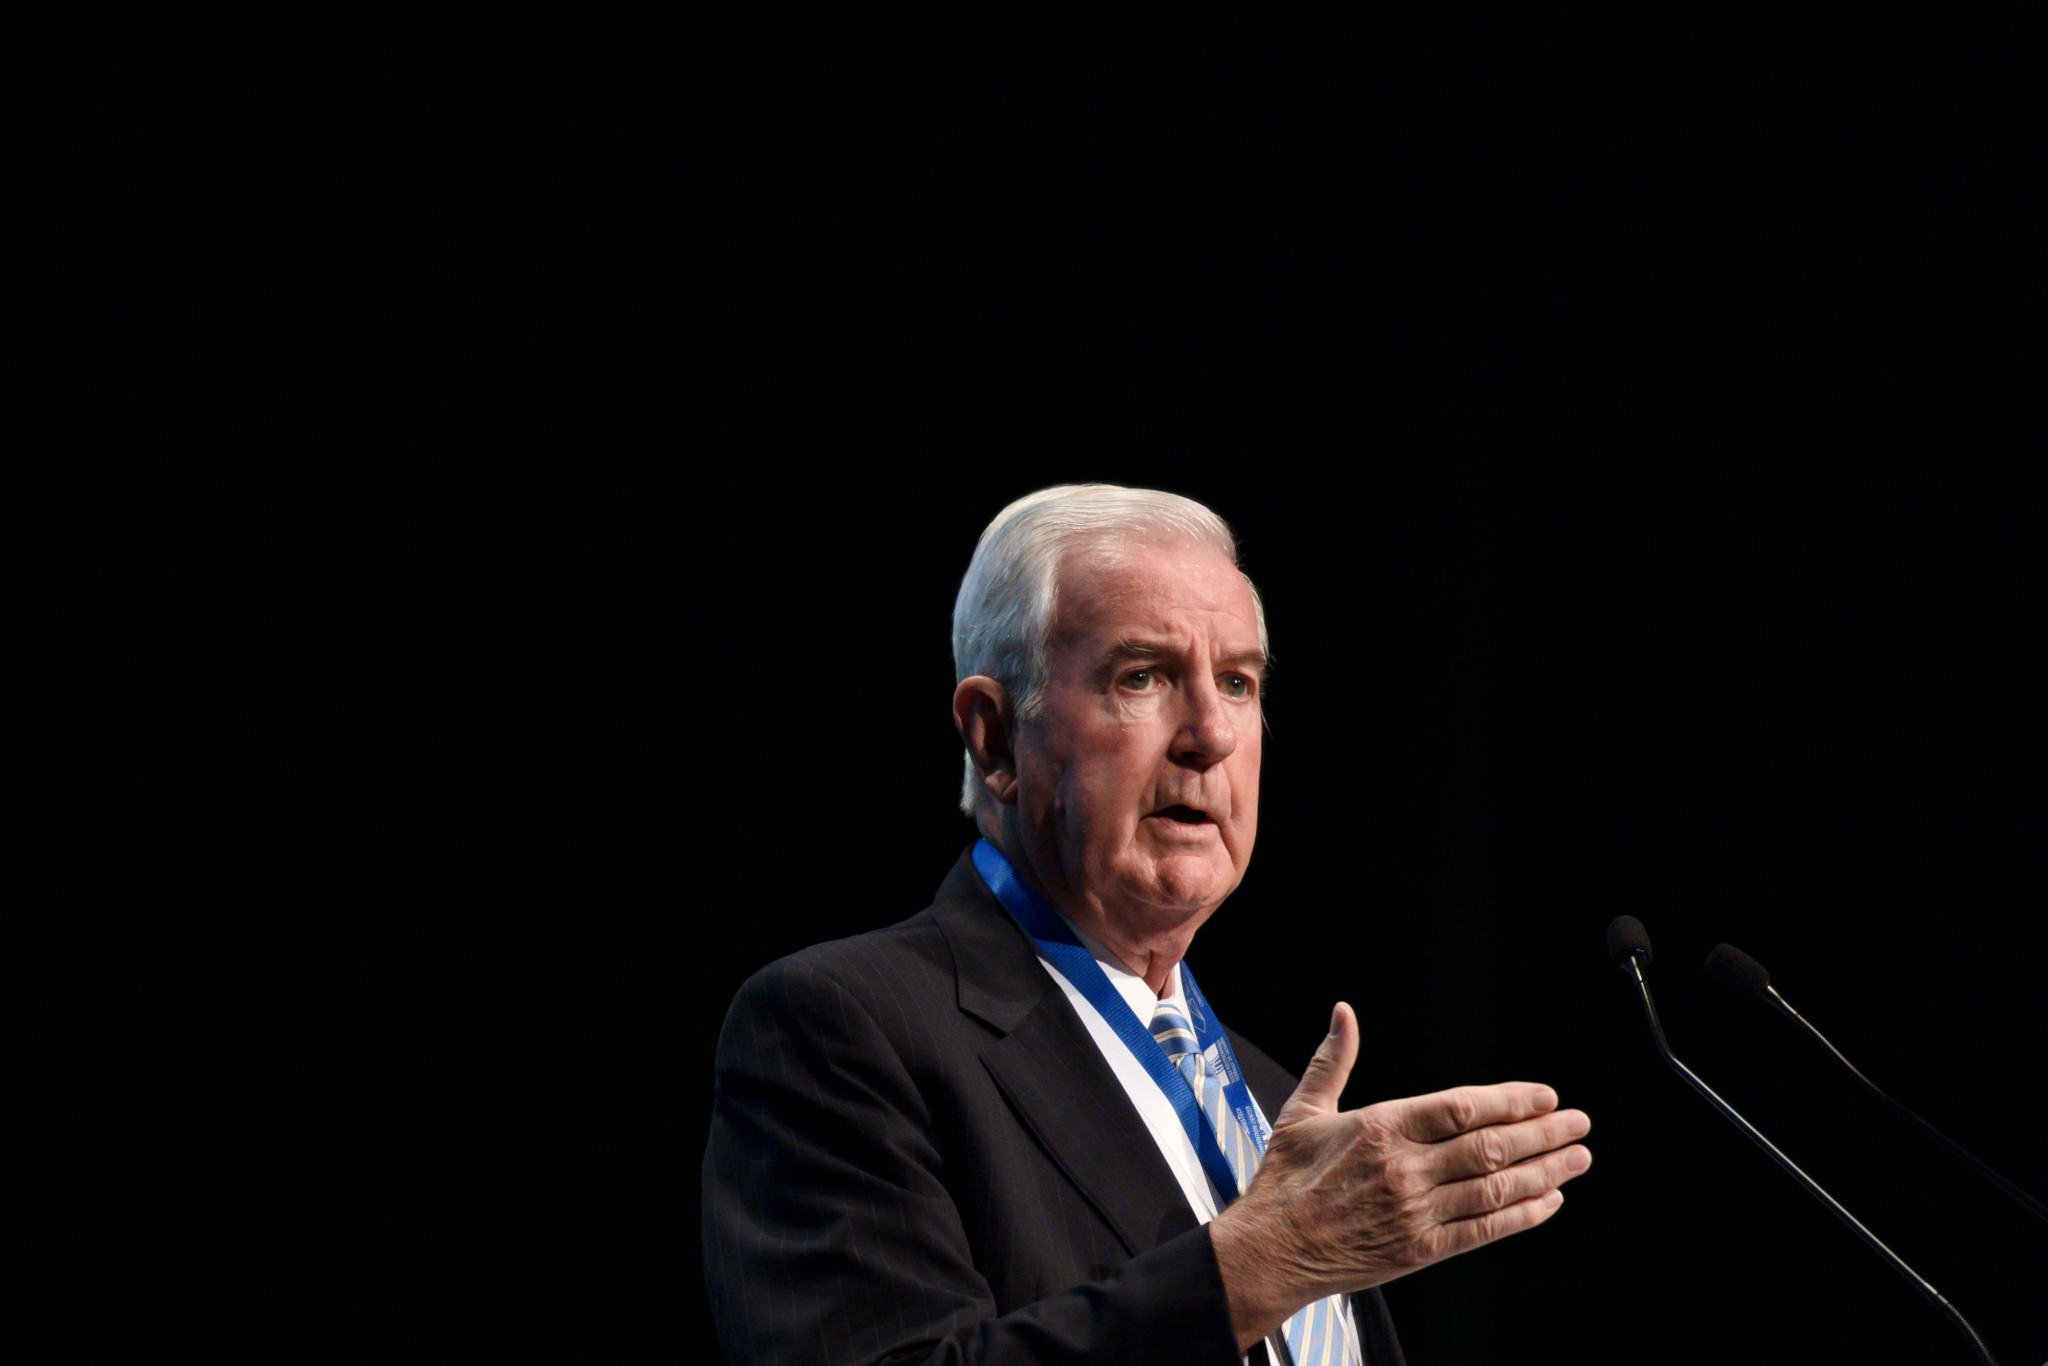 Sir Craig Reedie spoke extensively on Russia on the opening day of the WADA Symposium ©Getty Images